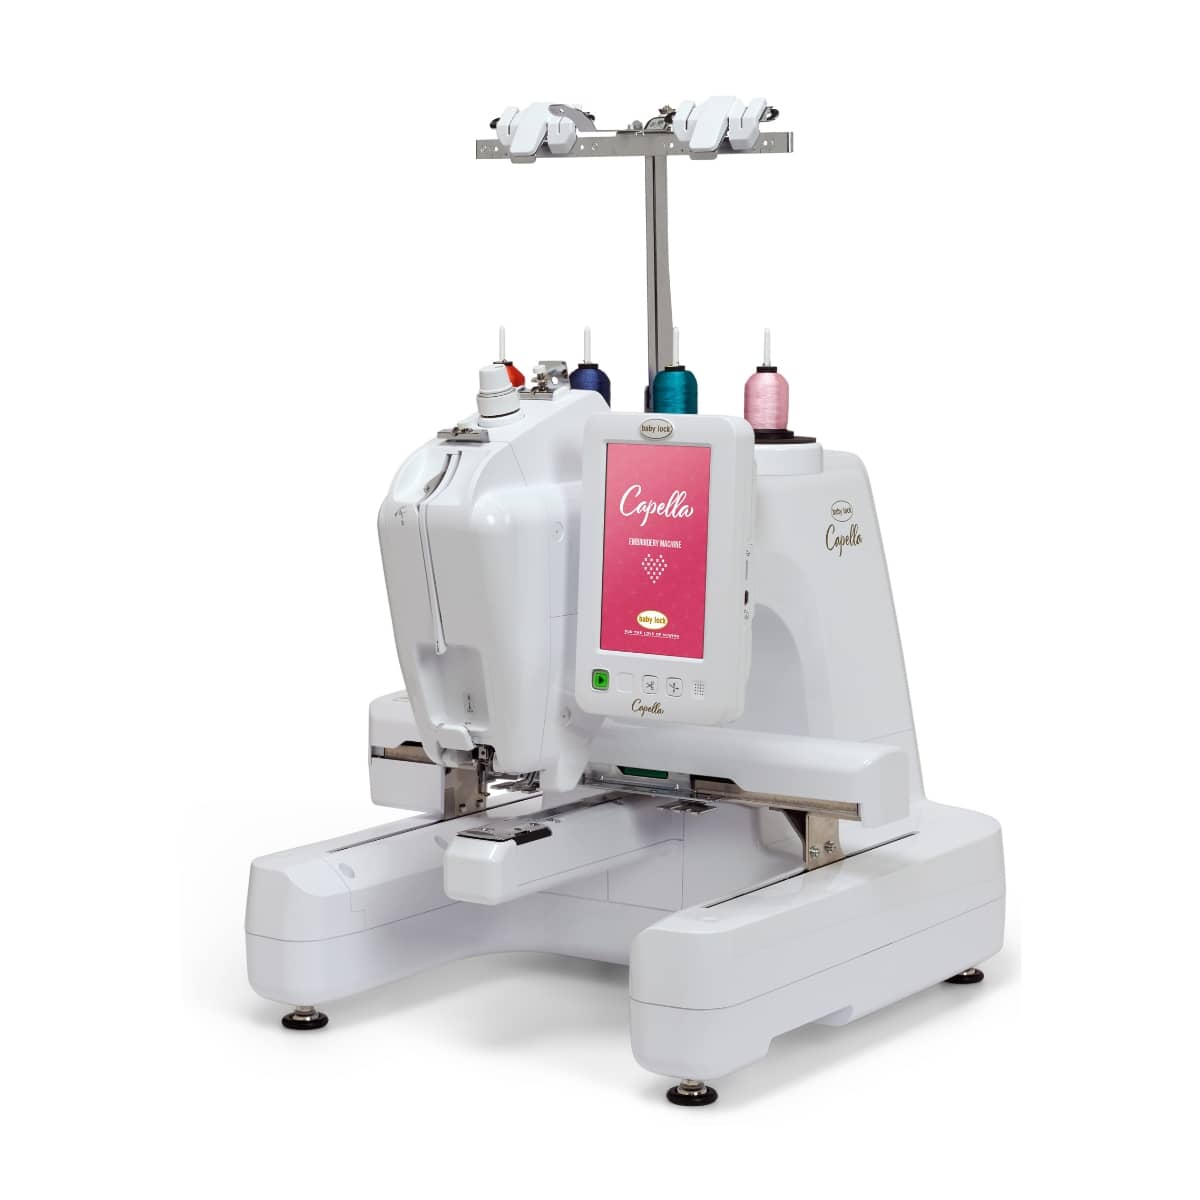 Automatic Bobbin Winder for Sewing Machine Electric Bobbin Winding with  Spool Thread Stand for Brother, Babylock, Singer, Janome, Automatic Thread